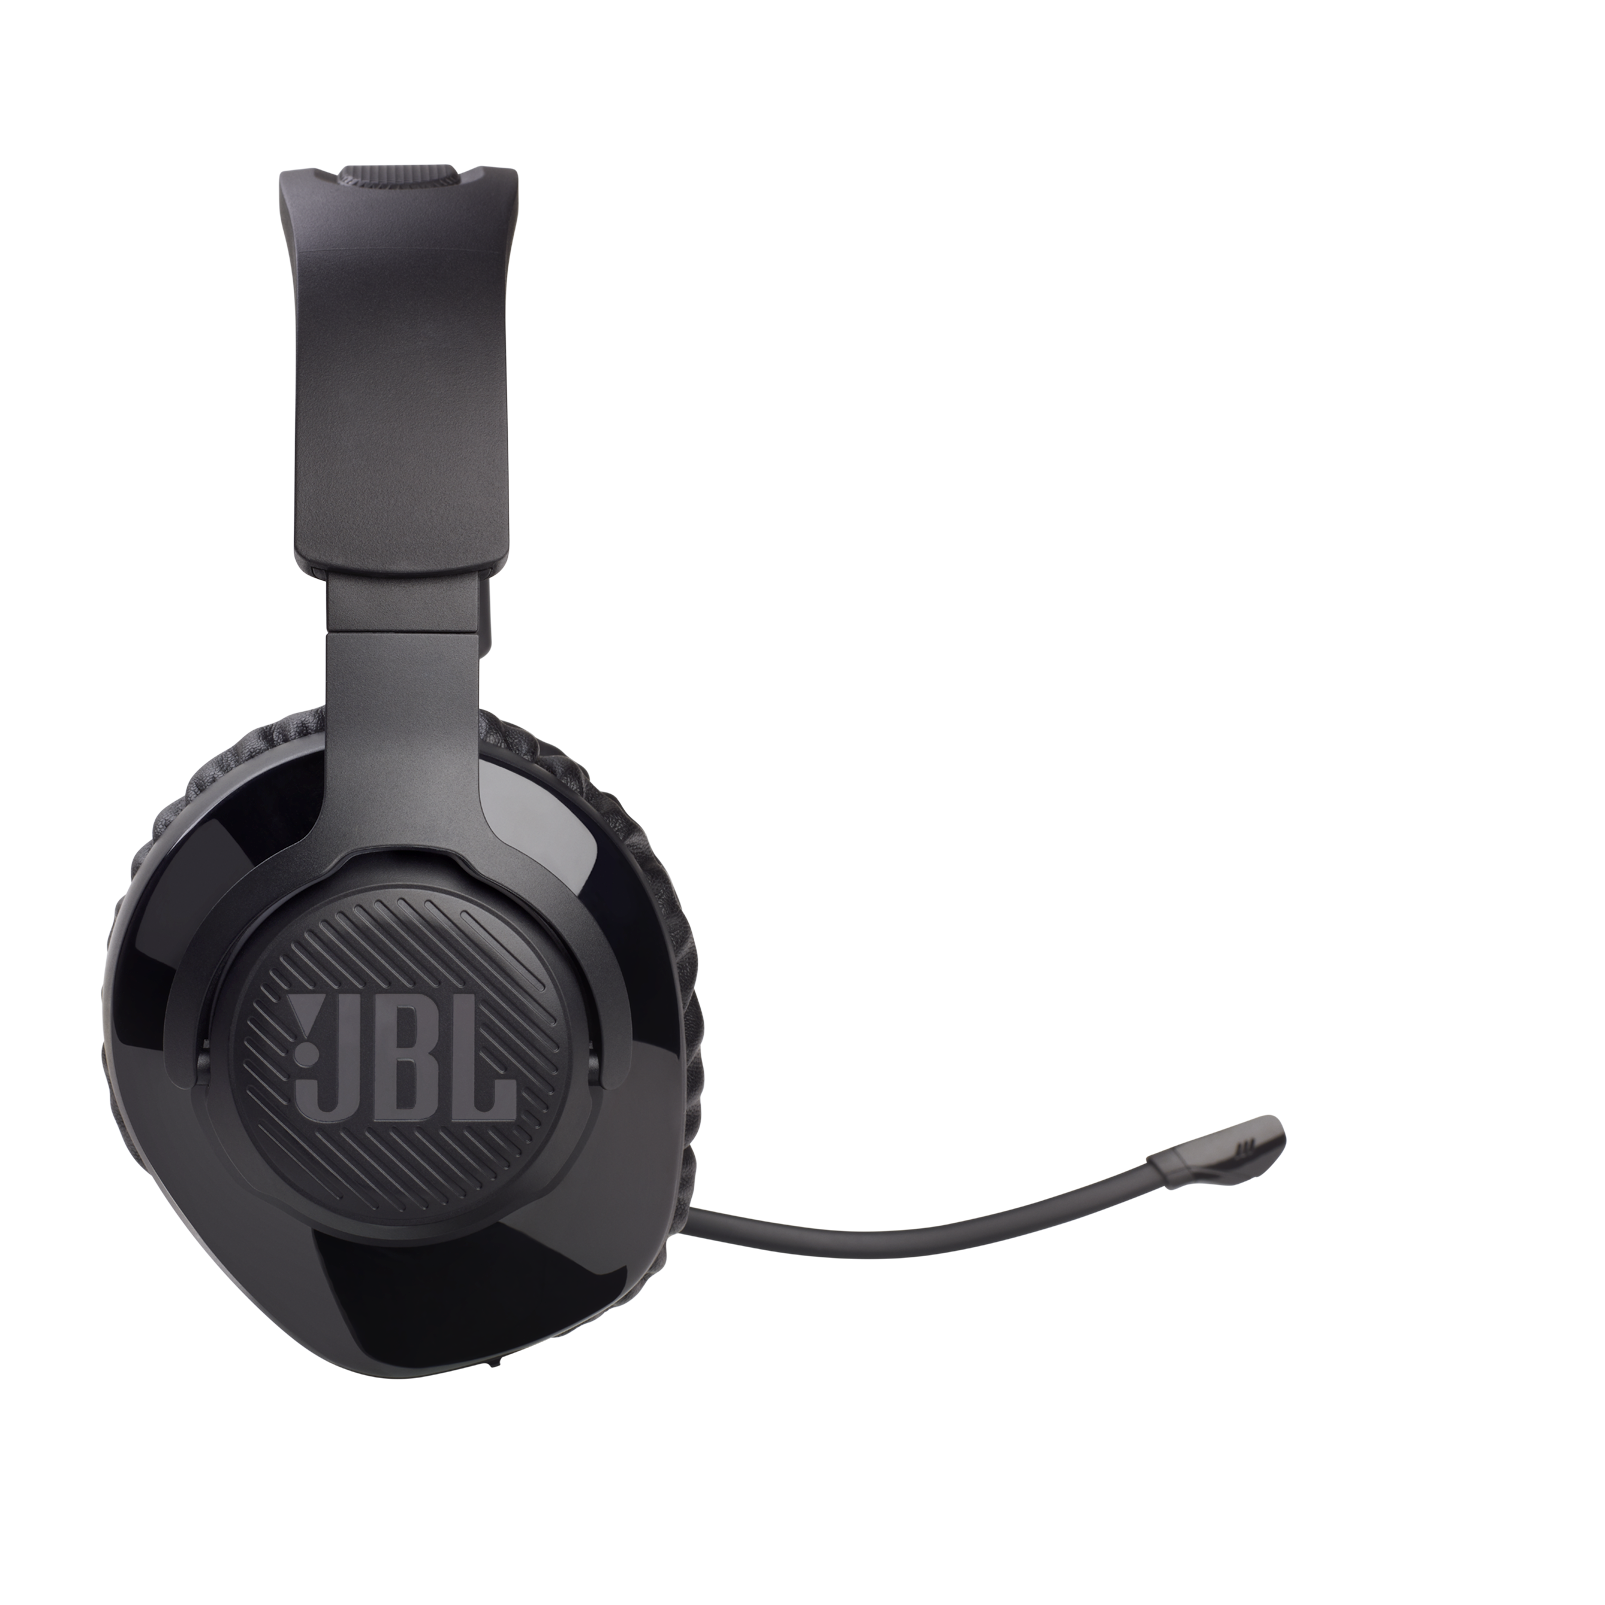 JBL Quantum 350 Wireless - Black - Wireless PC gaming headset with detachable boom mic - Right